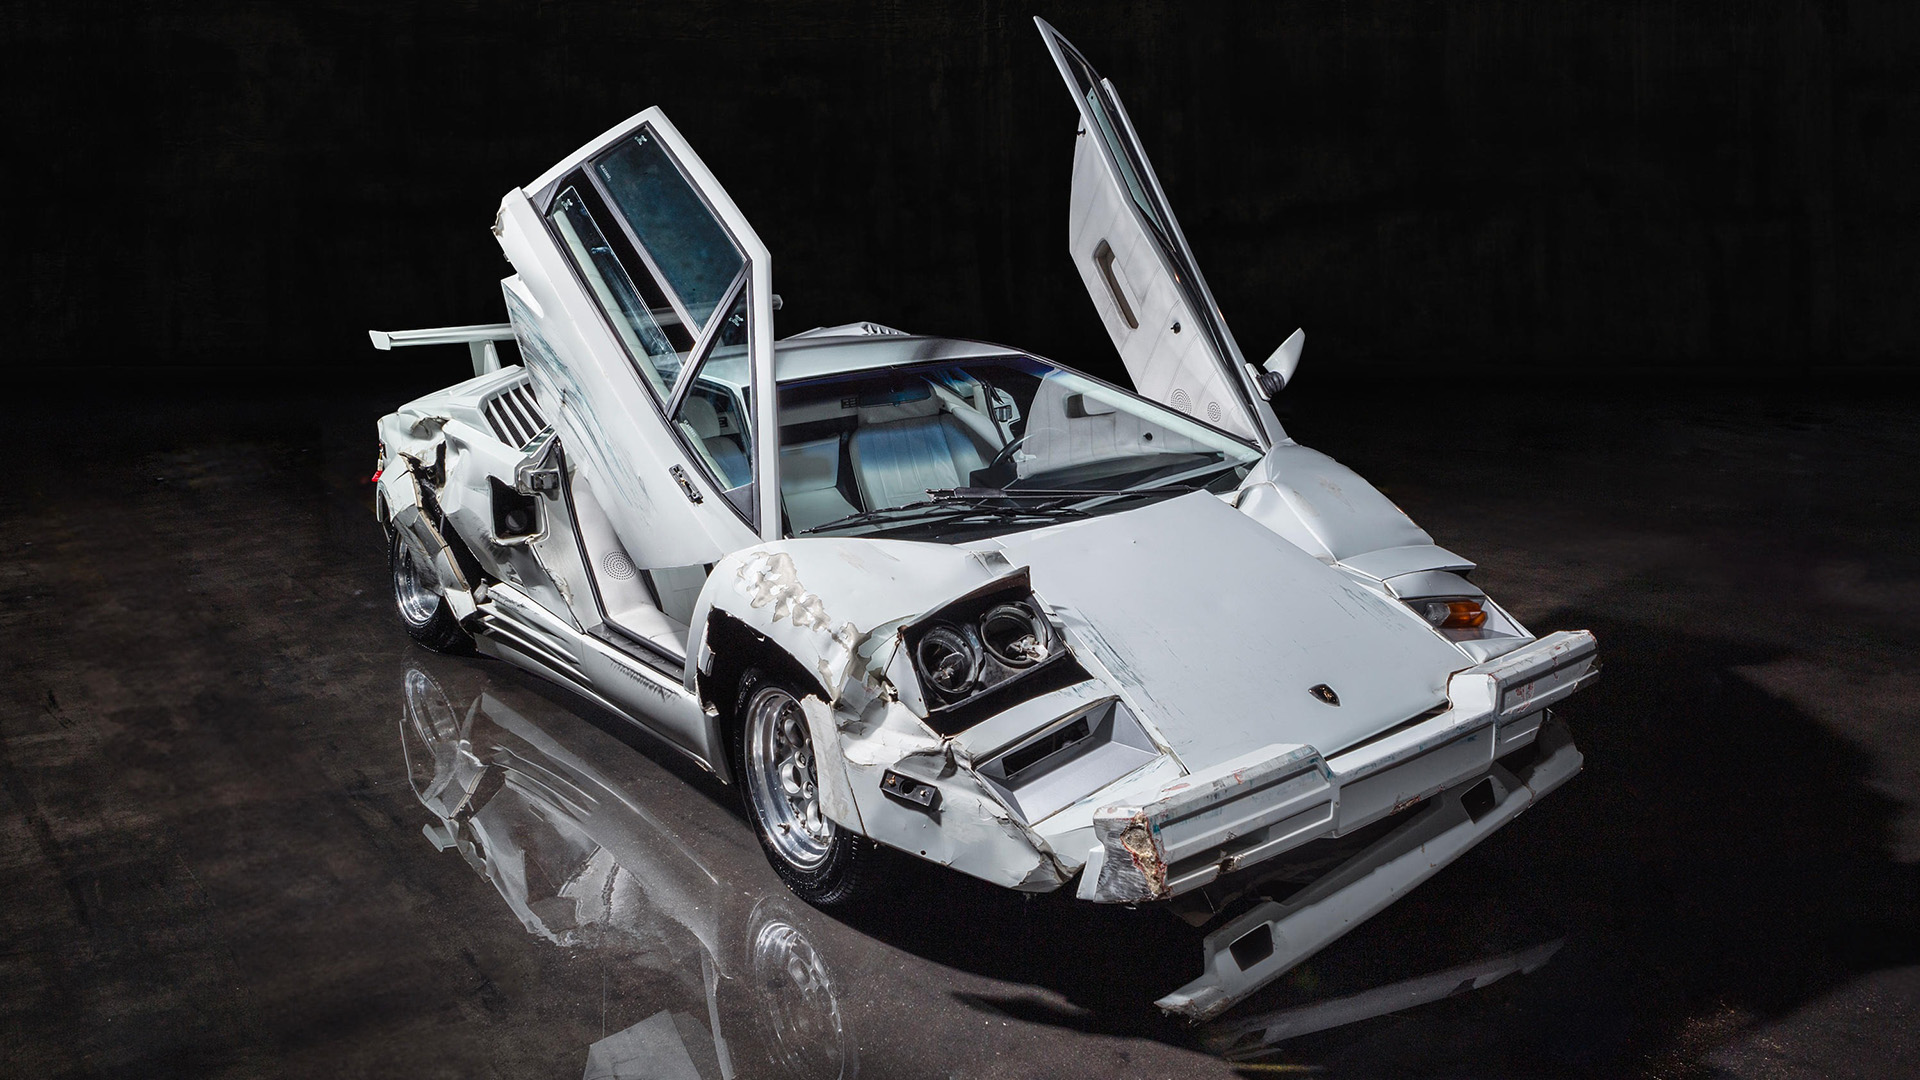 For Sale: The Wrecked Lamborghini Countach From The Wolf of Wall Street